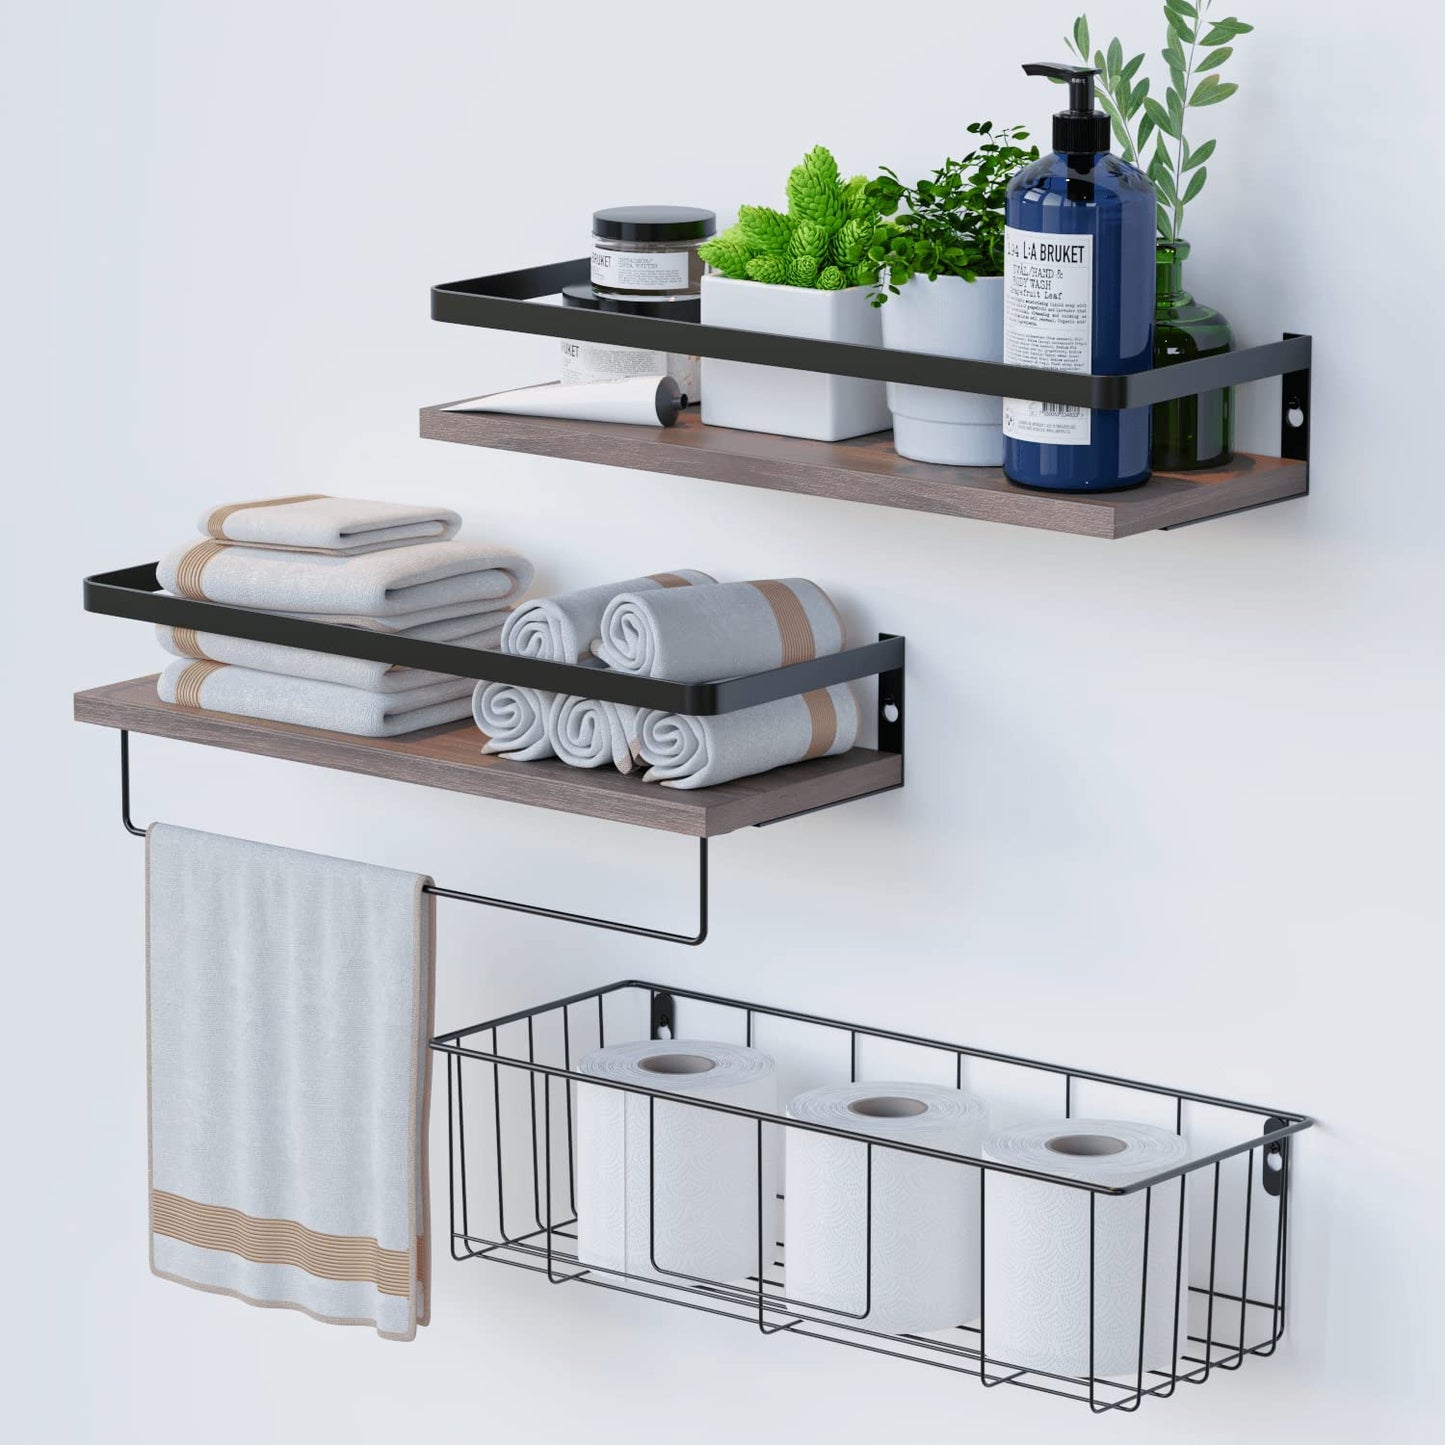 Floating Shelves with Toilet Paper Basket Set, Rustic Wall Shelves with Removable Towel Bar, Farmhouse Floating Bathroom Shelves for Kitchen and Bedroom - Rustic Brown